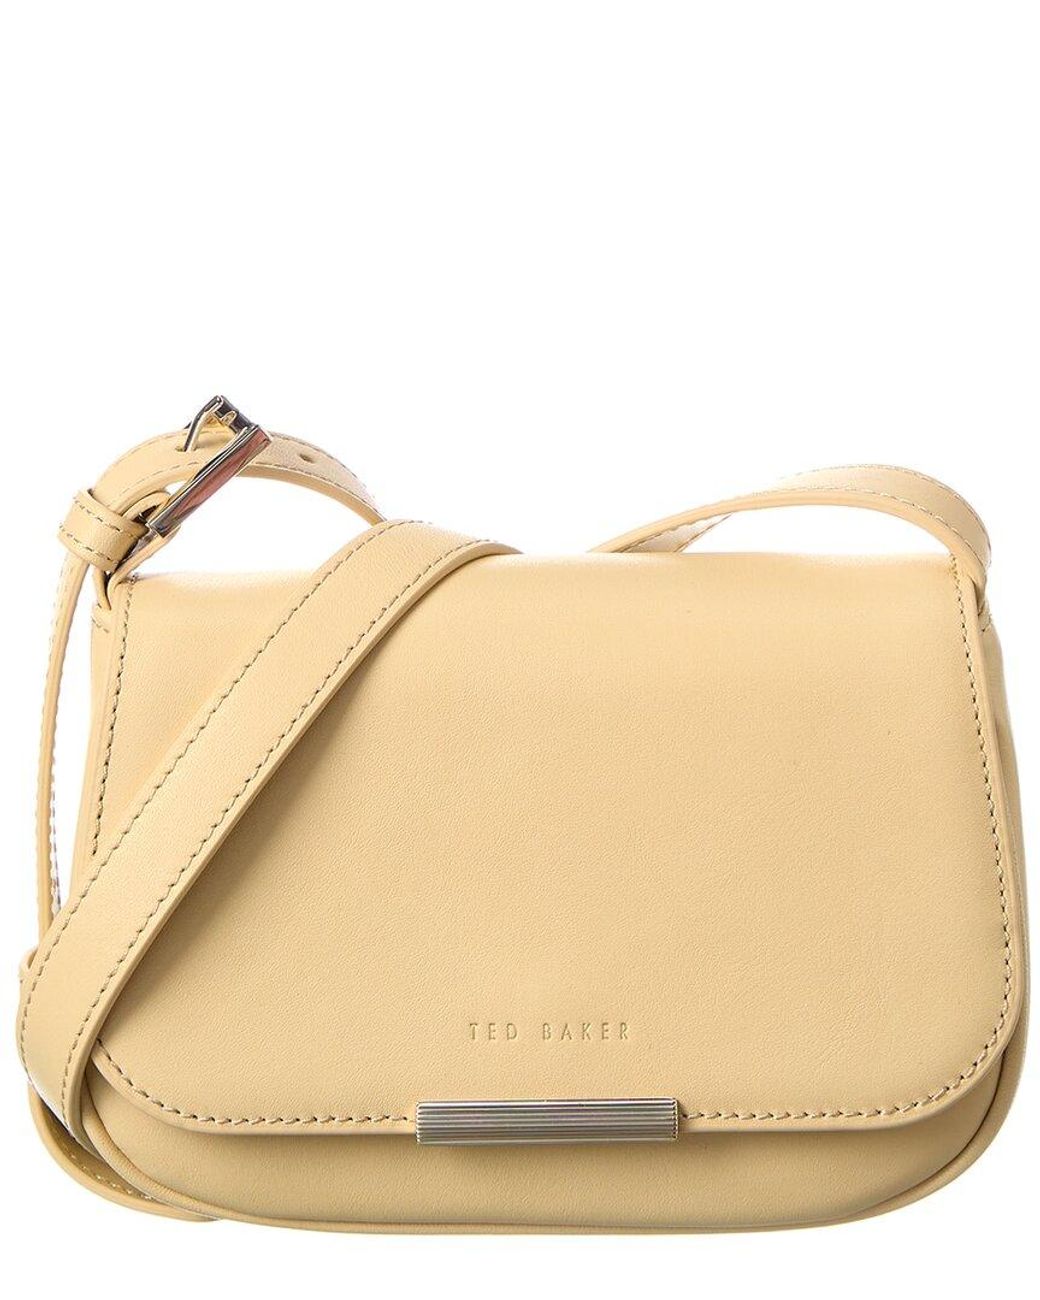 Ted Baker Bagira Curved Baguette Leather Crossbody in Natural | Lyst